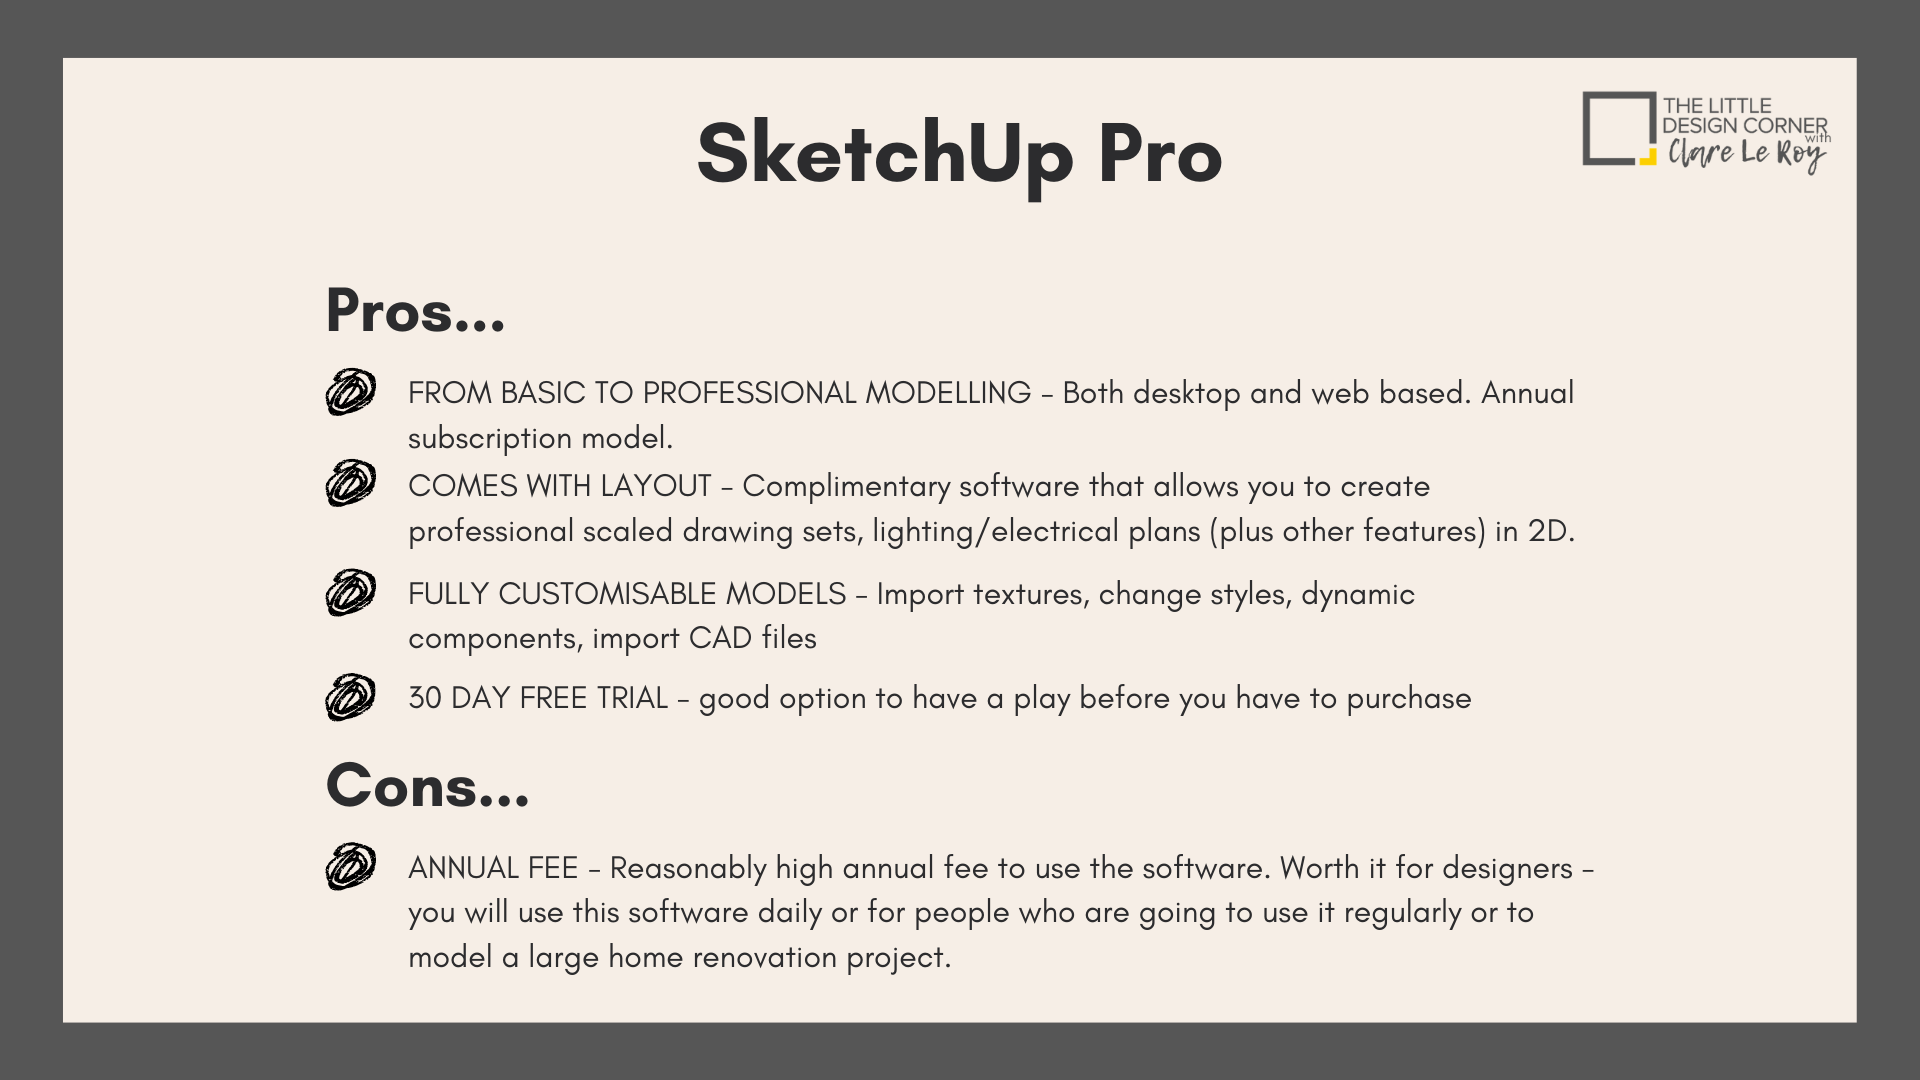 how to revert sketchup pro trial to free version